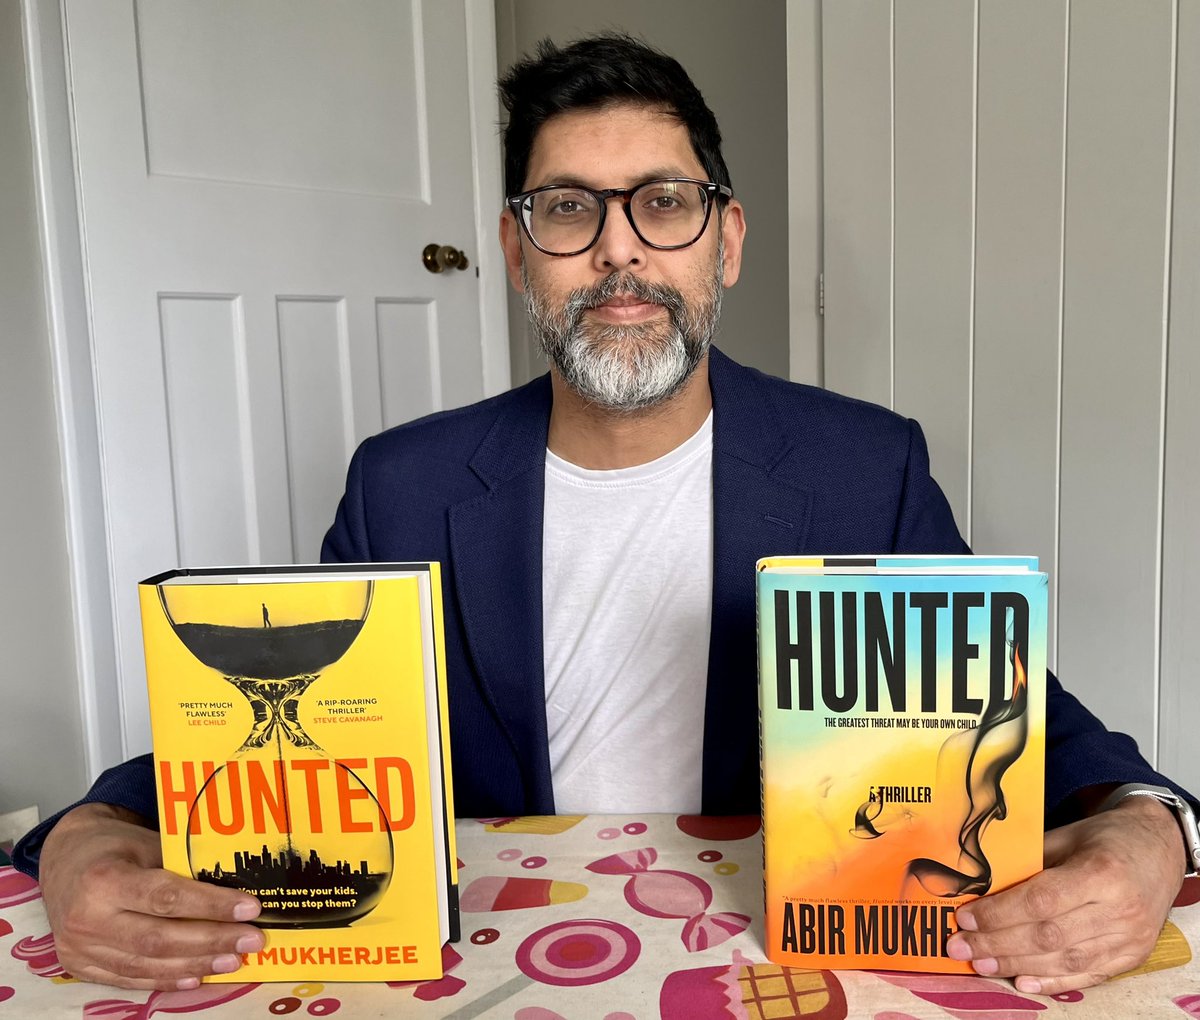 TEN DAYS TO SELL THE REST! Because of the woman below, my mortgage repayments have gone through the roof. Help me pay it (and feed my kids) by ordering my new book here: linktr.ee/abirmukherjee #Hunted